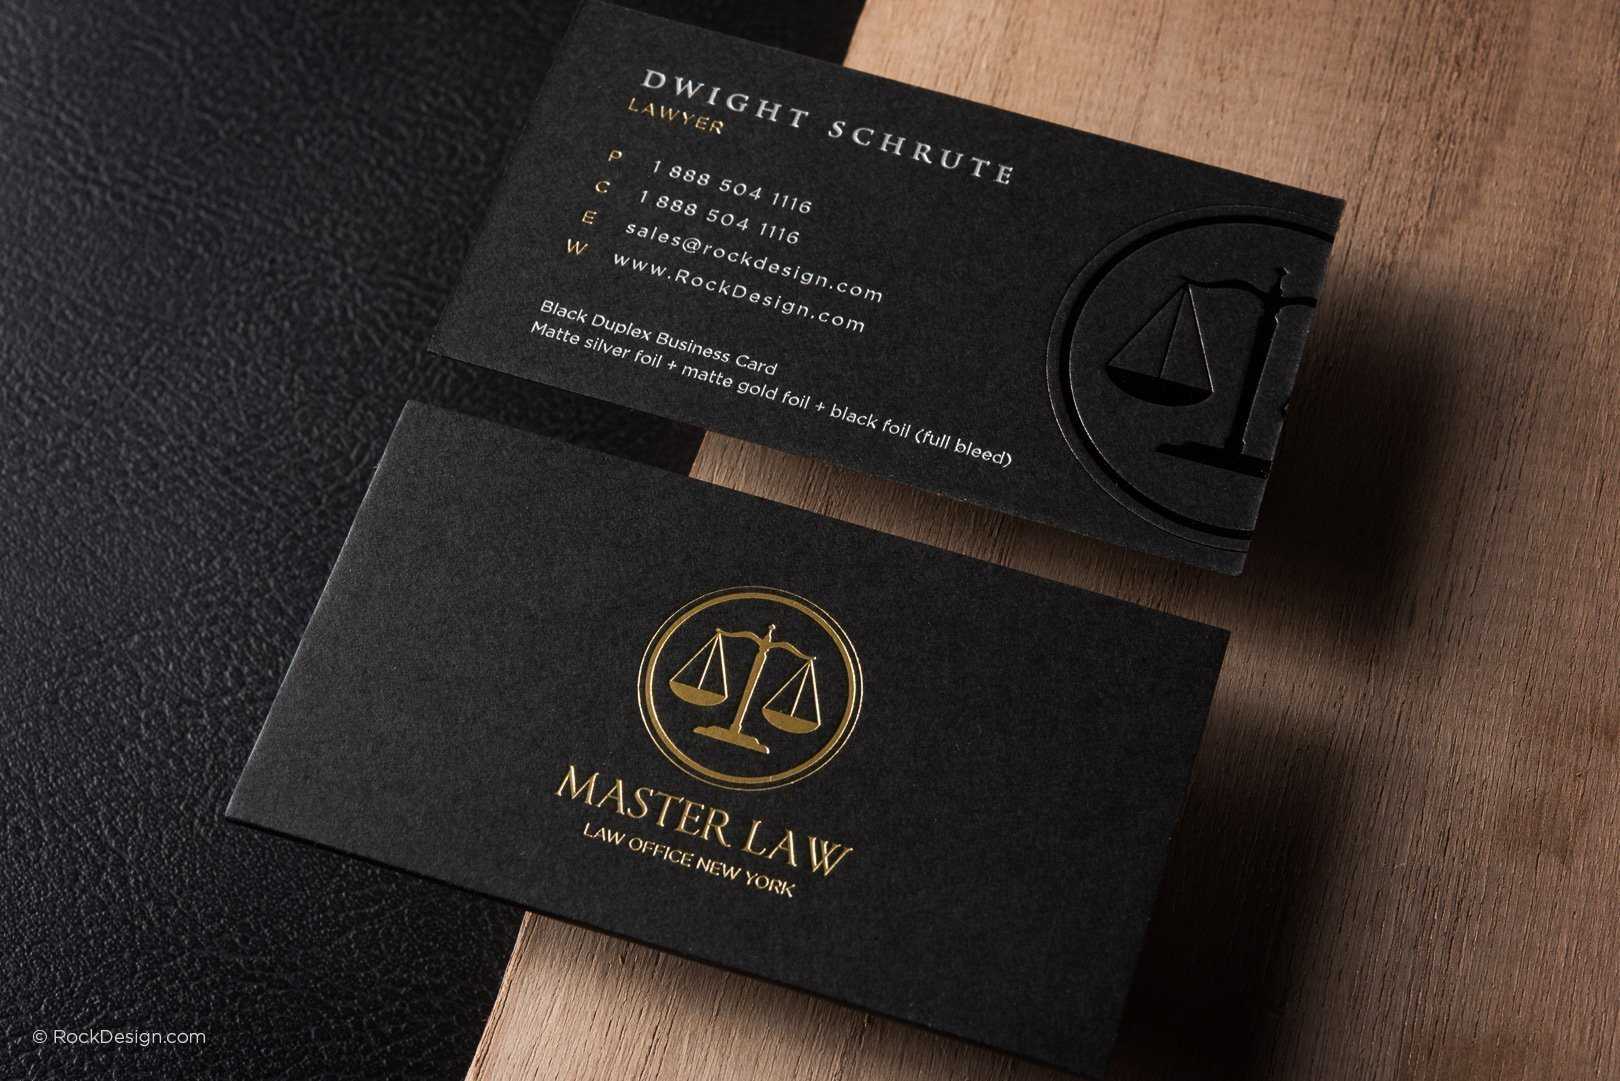 Free Lawyer Business Card Template | Rockdesign Within Legal Business Cards Templates Free